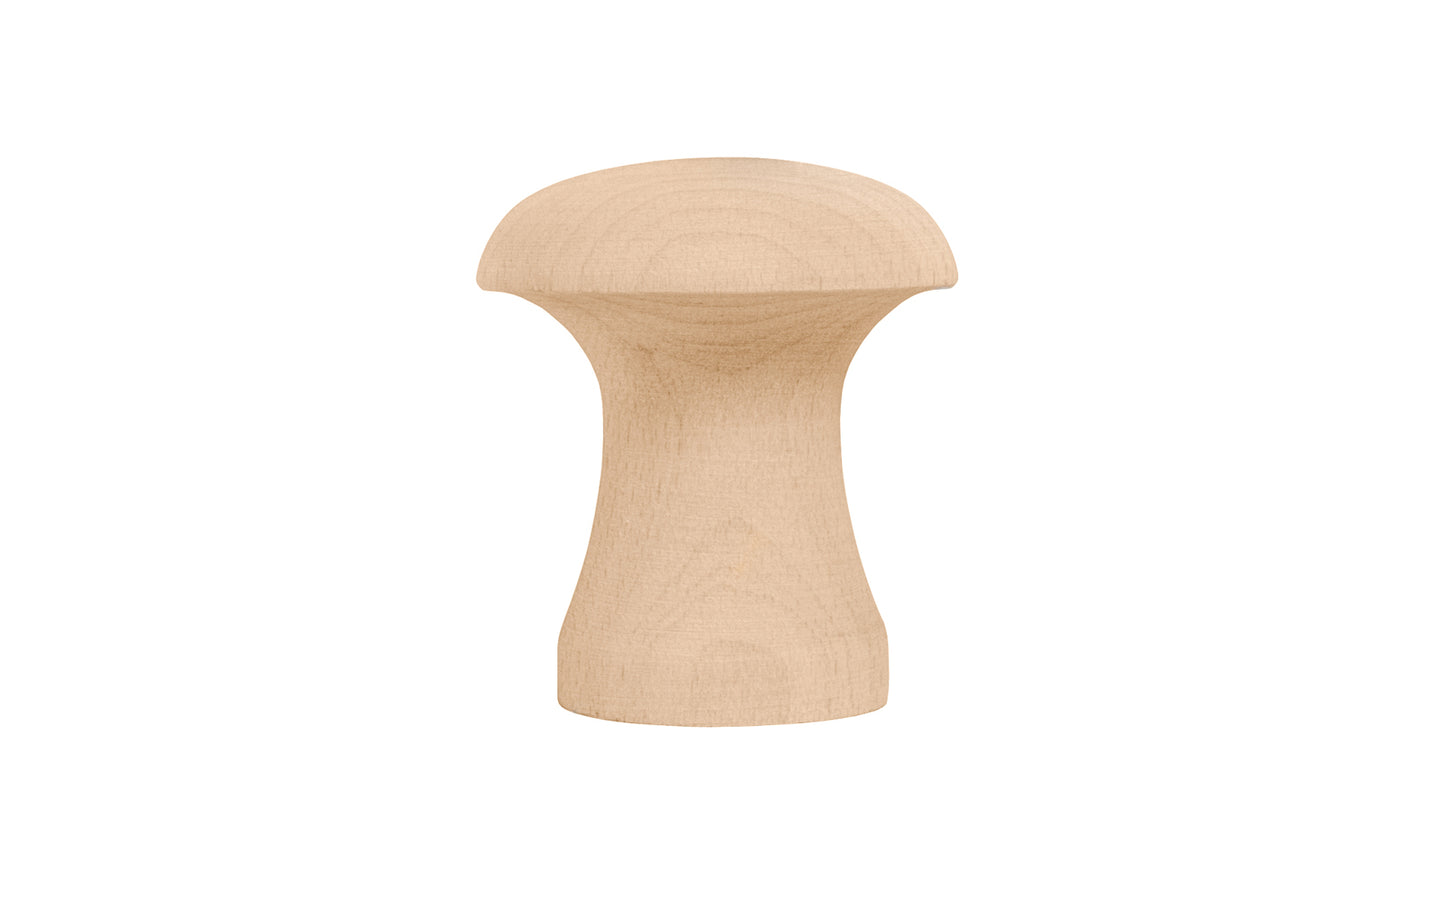 Classic & traditional Shaker-style solid wood cabinet knobs. Maple Wood Knob. These charming wood knobs have a smooth & attractive look & feel. Wooden shaker knob for cabinets, drawers, & furniture. Unfinished mushroom shape wood knob.